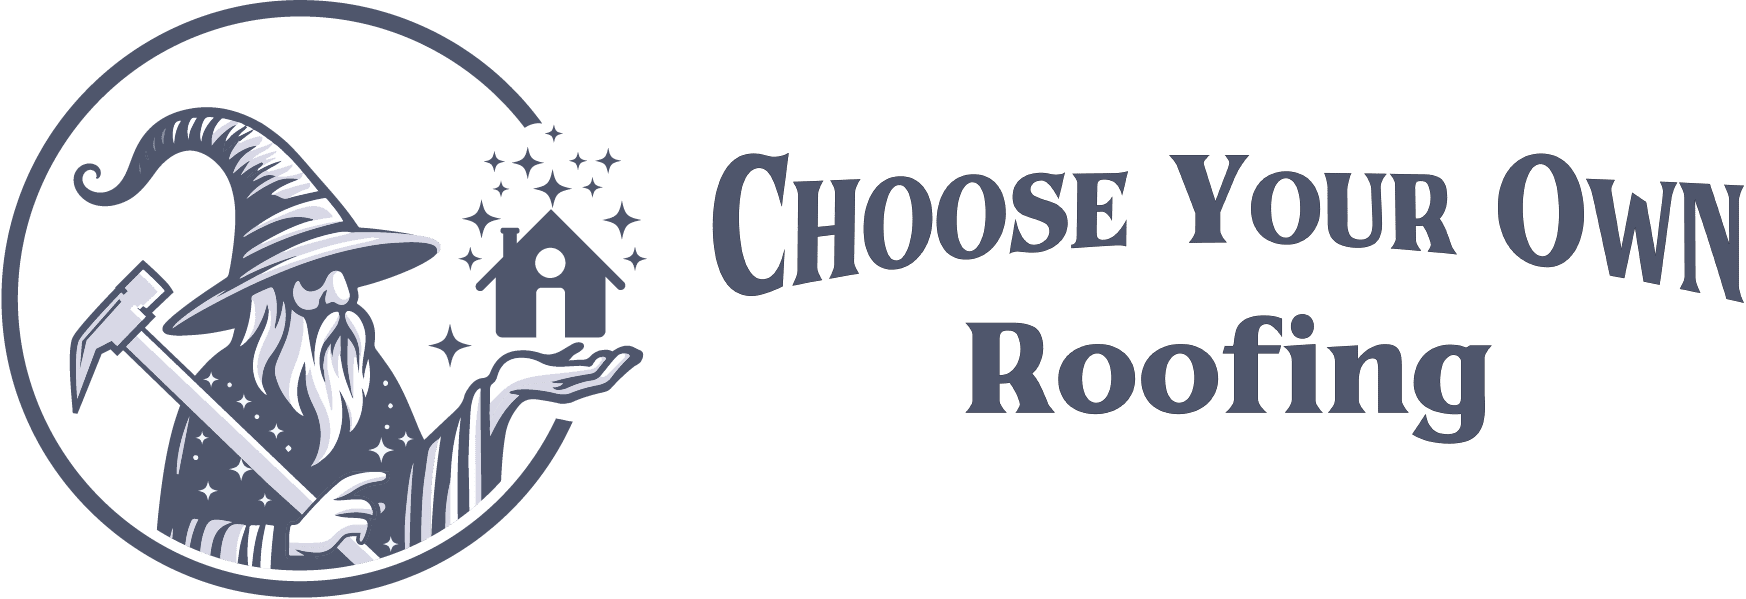 Choose Your Own Roofing